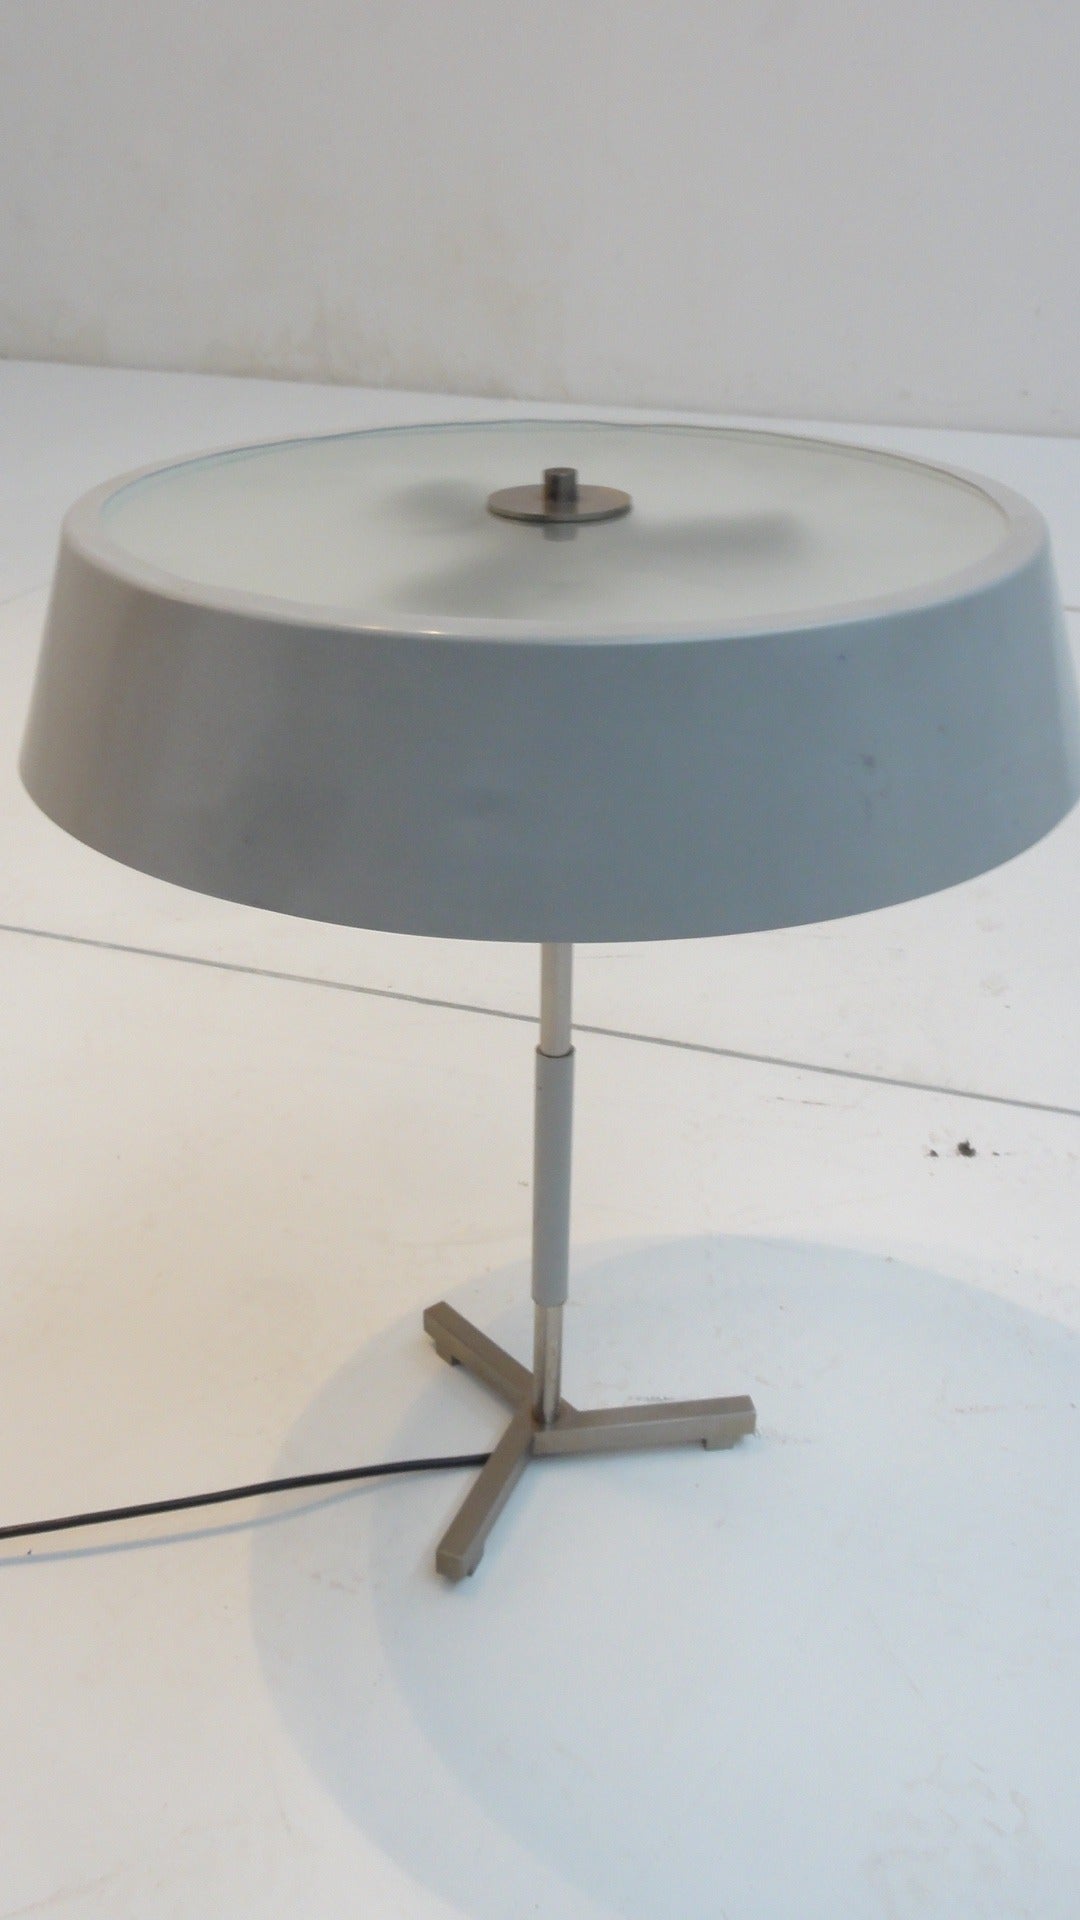 A top quality manufactured desk lamp by Dutch designer H. Fillekes who worked for Rotterdam based lighting company Artiforte 

A nickel plated sculptured tripod base holds a grey enamelled metal shade and frosted glass diffuser
The lamp holds 3